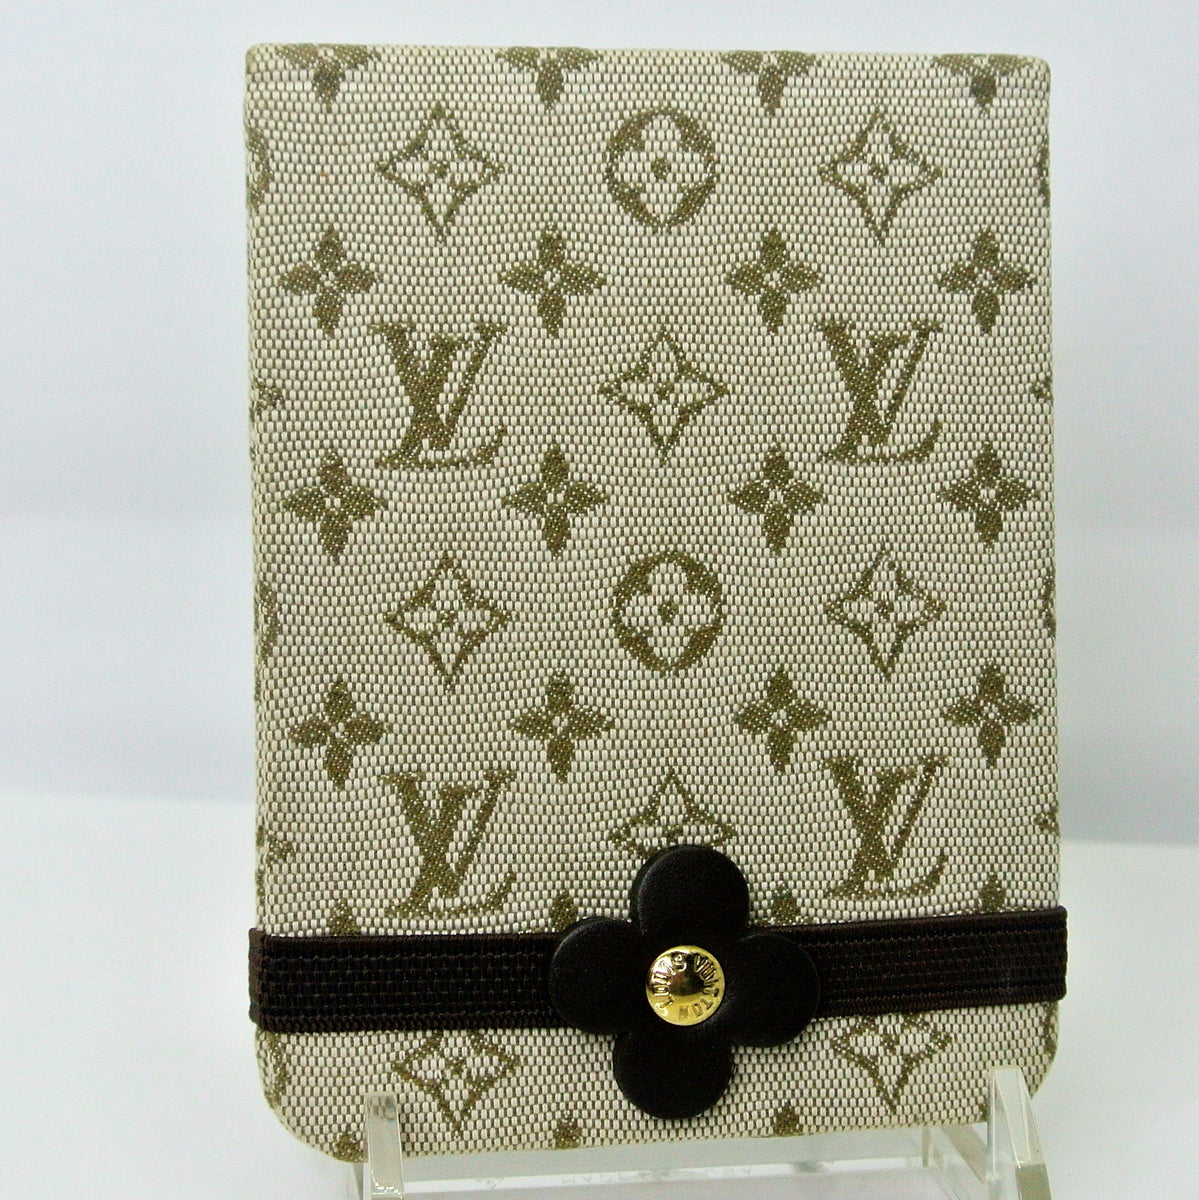 louis vuitton bag with writing on it